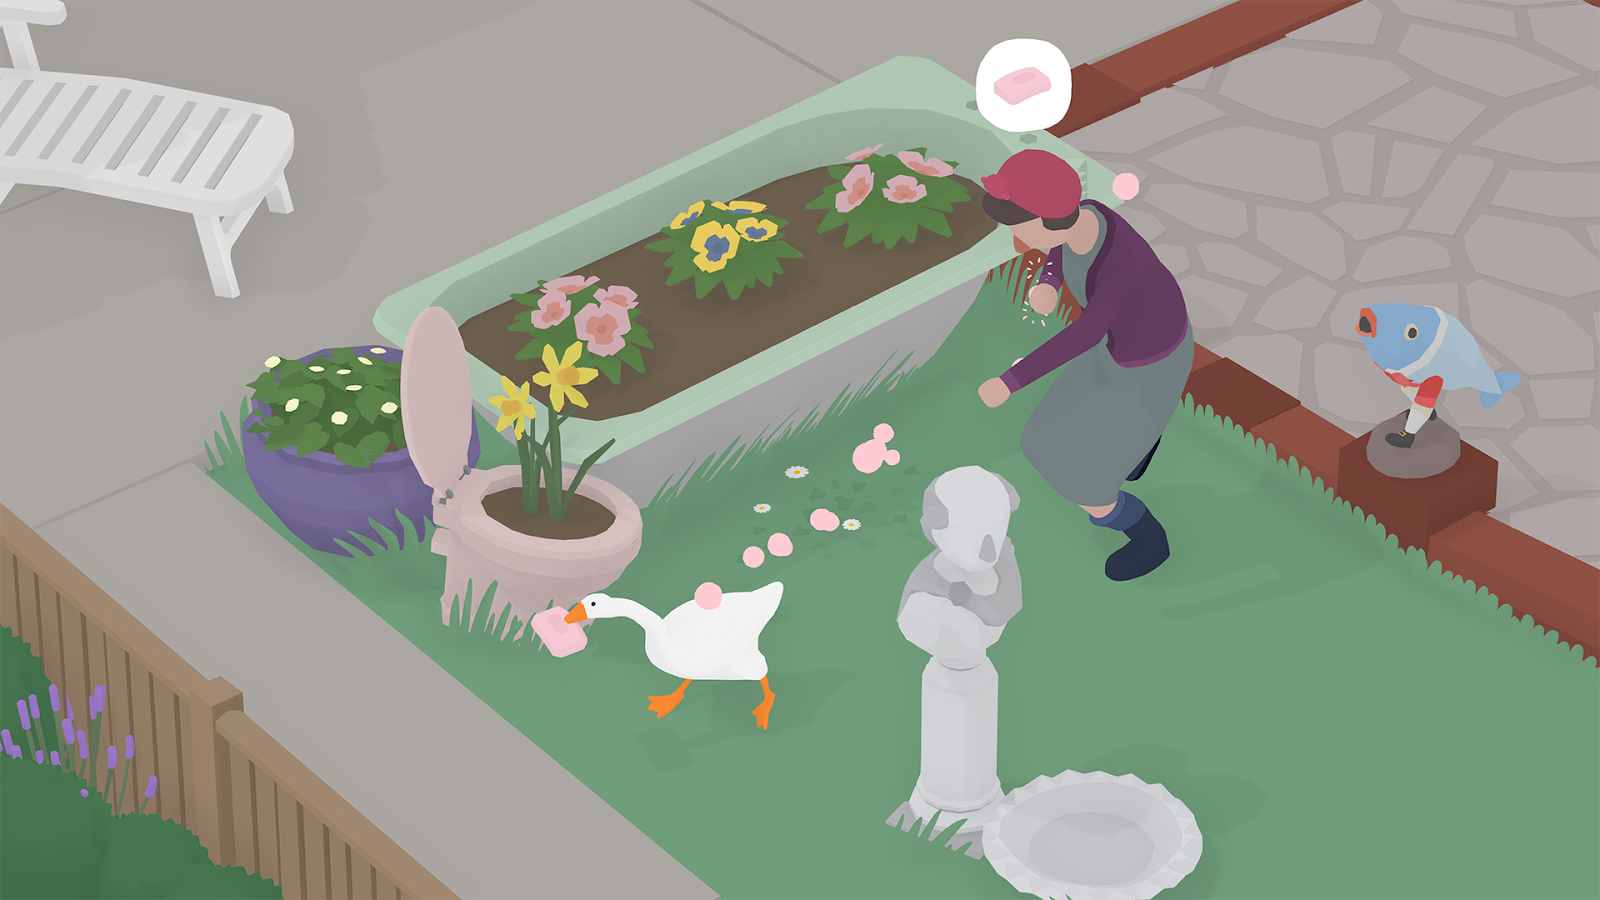 Screenshot of Untitled Goose Game where a villager in an apron is chasing the goose through their garden. The goose has a bar of soap in its beak